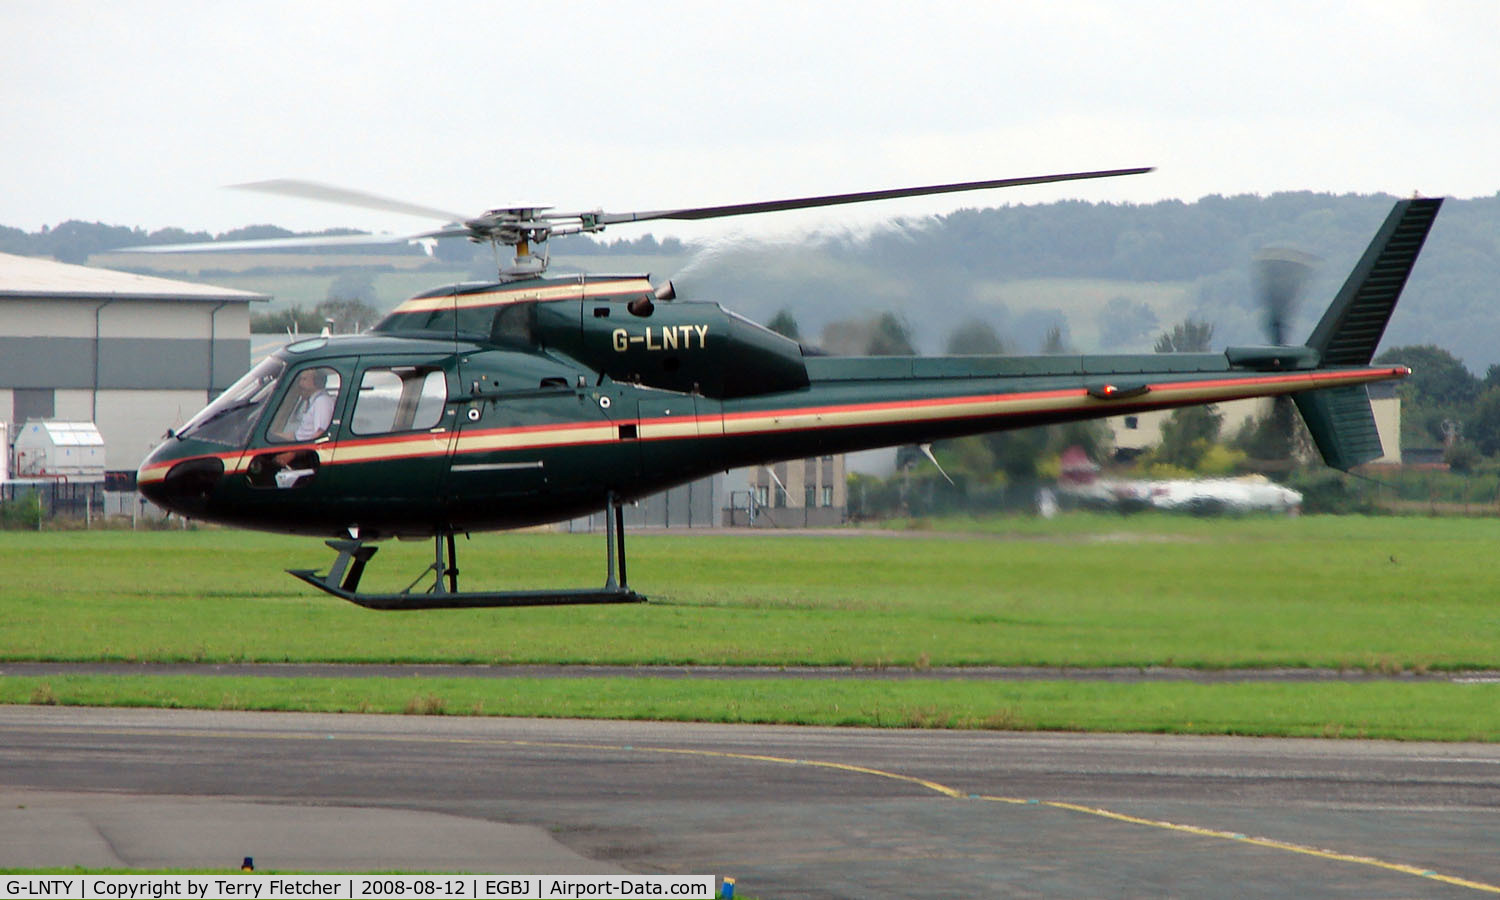 G-LNTY, 1983 Aerospatiale AS-355F-1 Ecureuil 2 C/N 5300, AS355F1 noted at Gloucestershire Airport  UK in Sept 2008